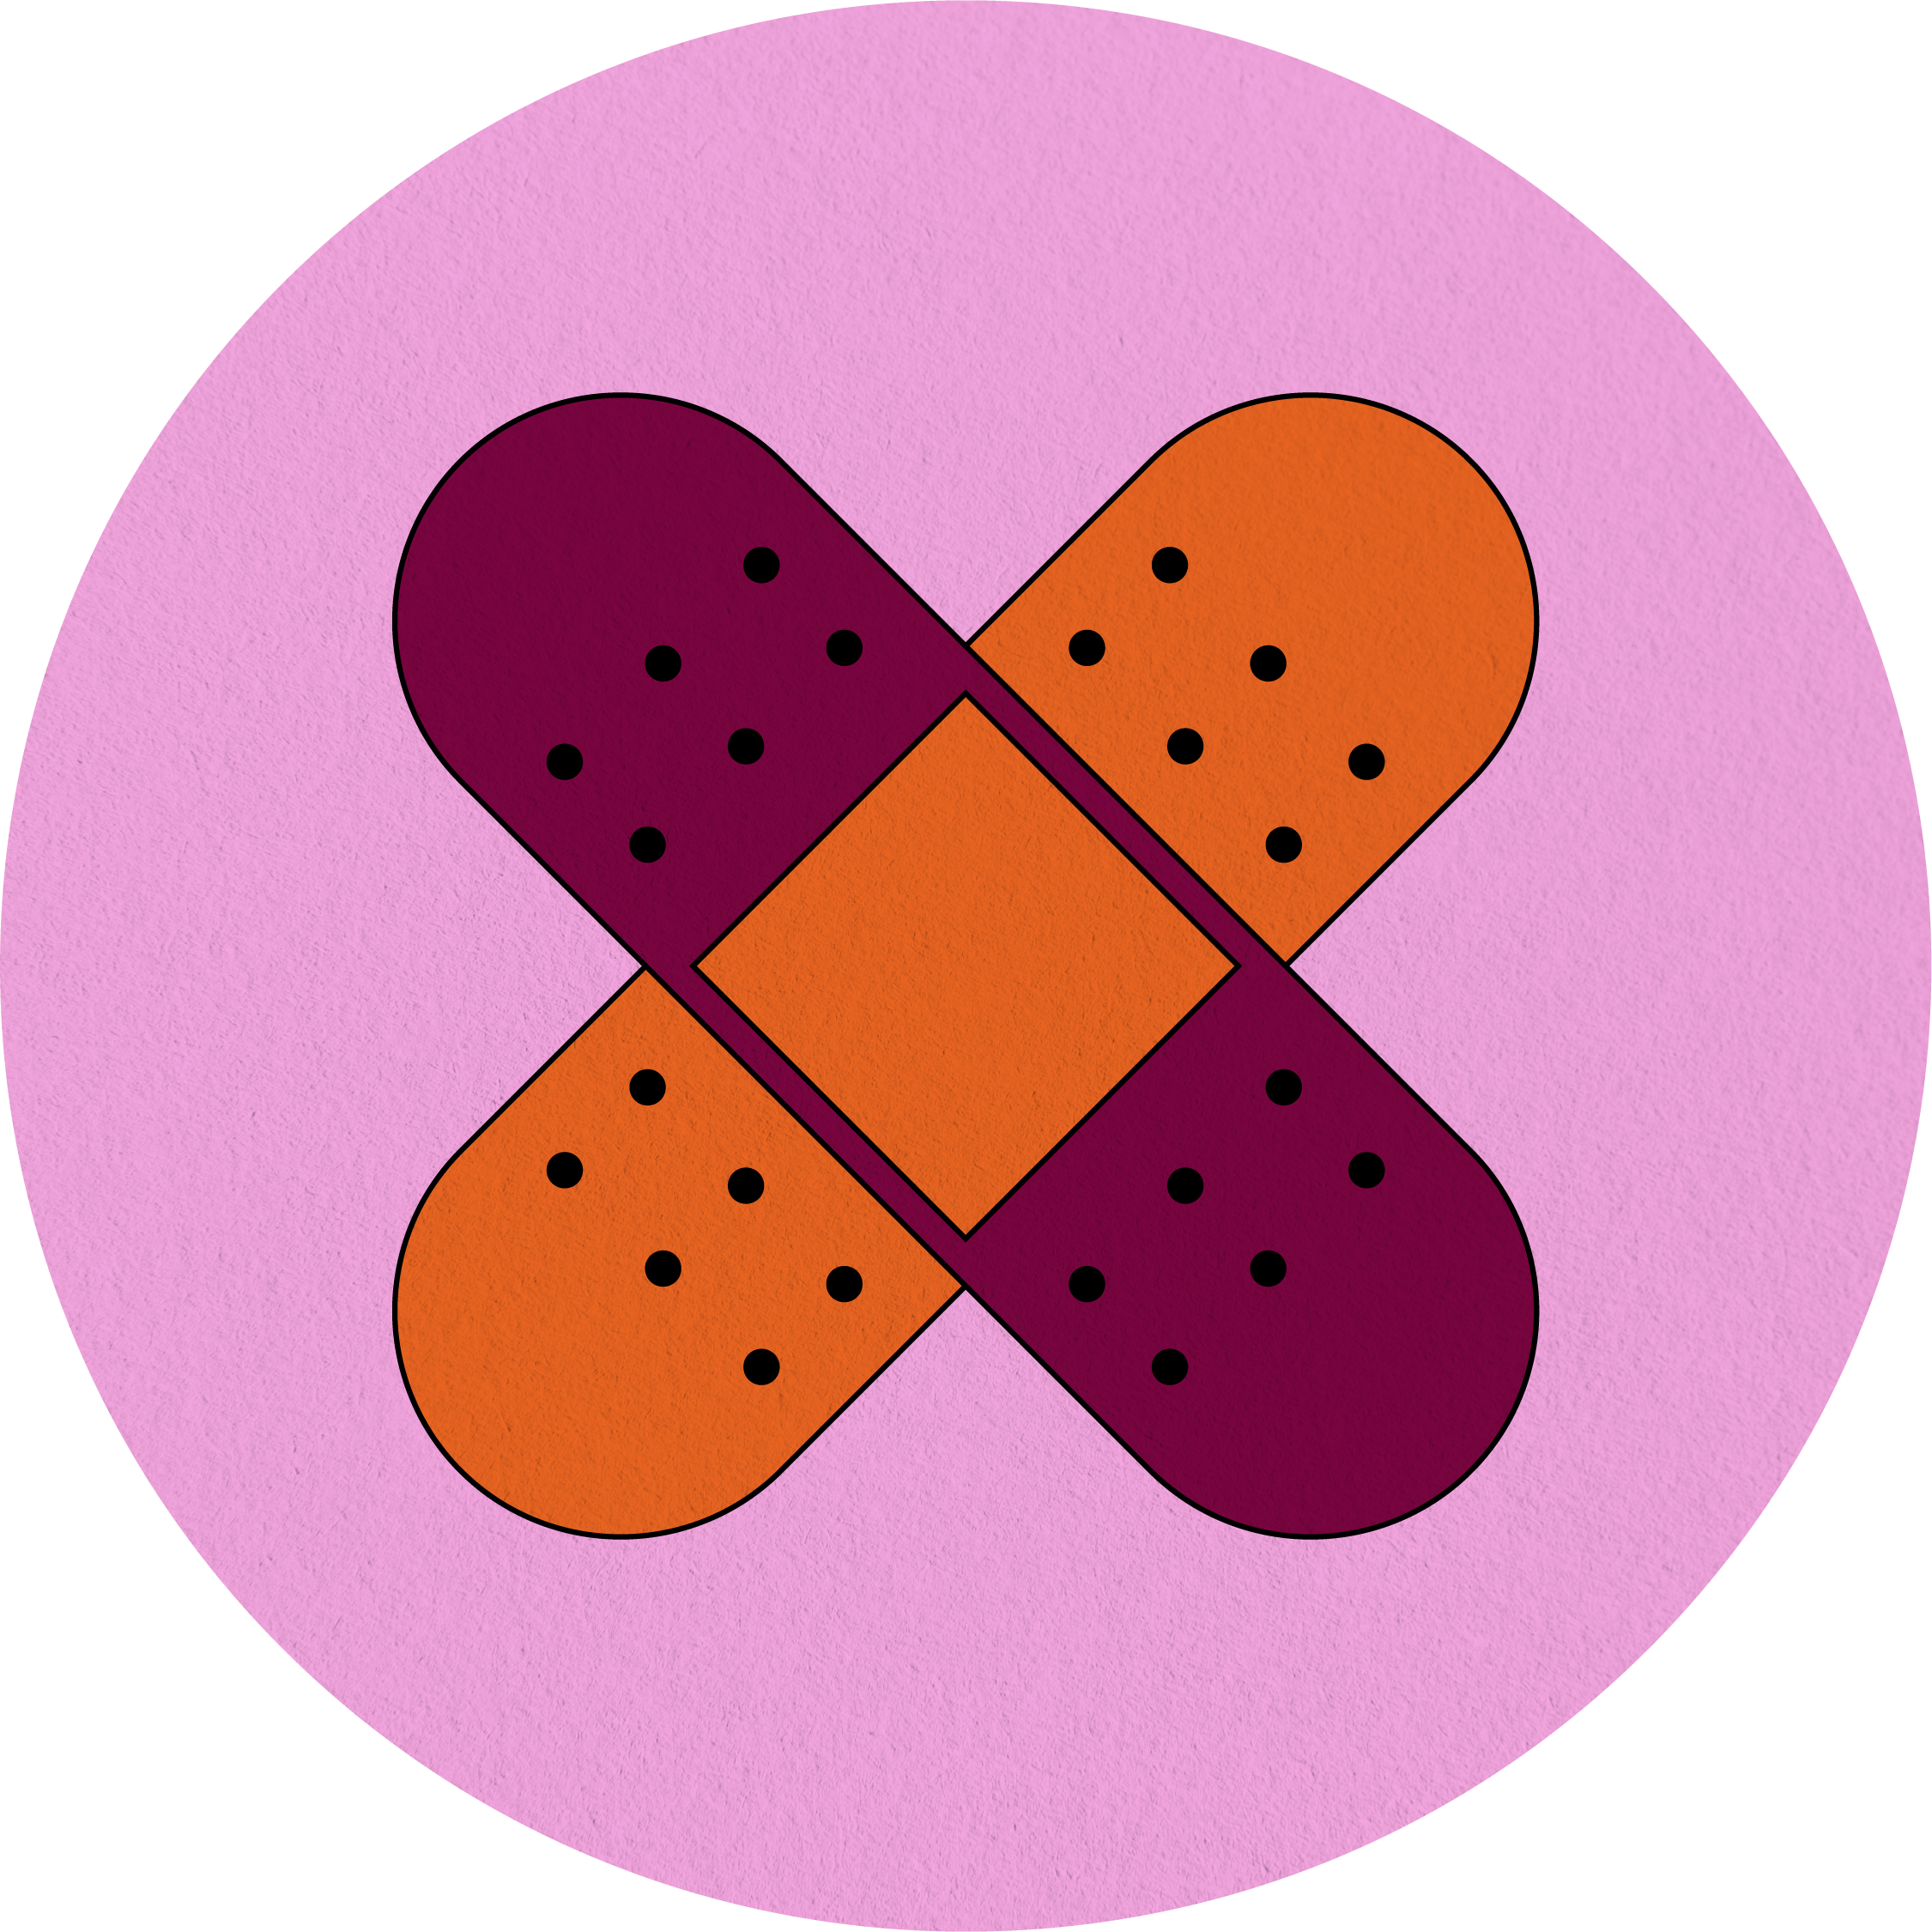 Illustration of two criss-crossed bandages on pink background.